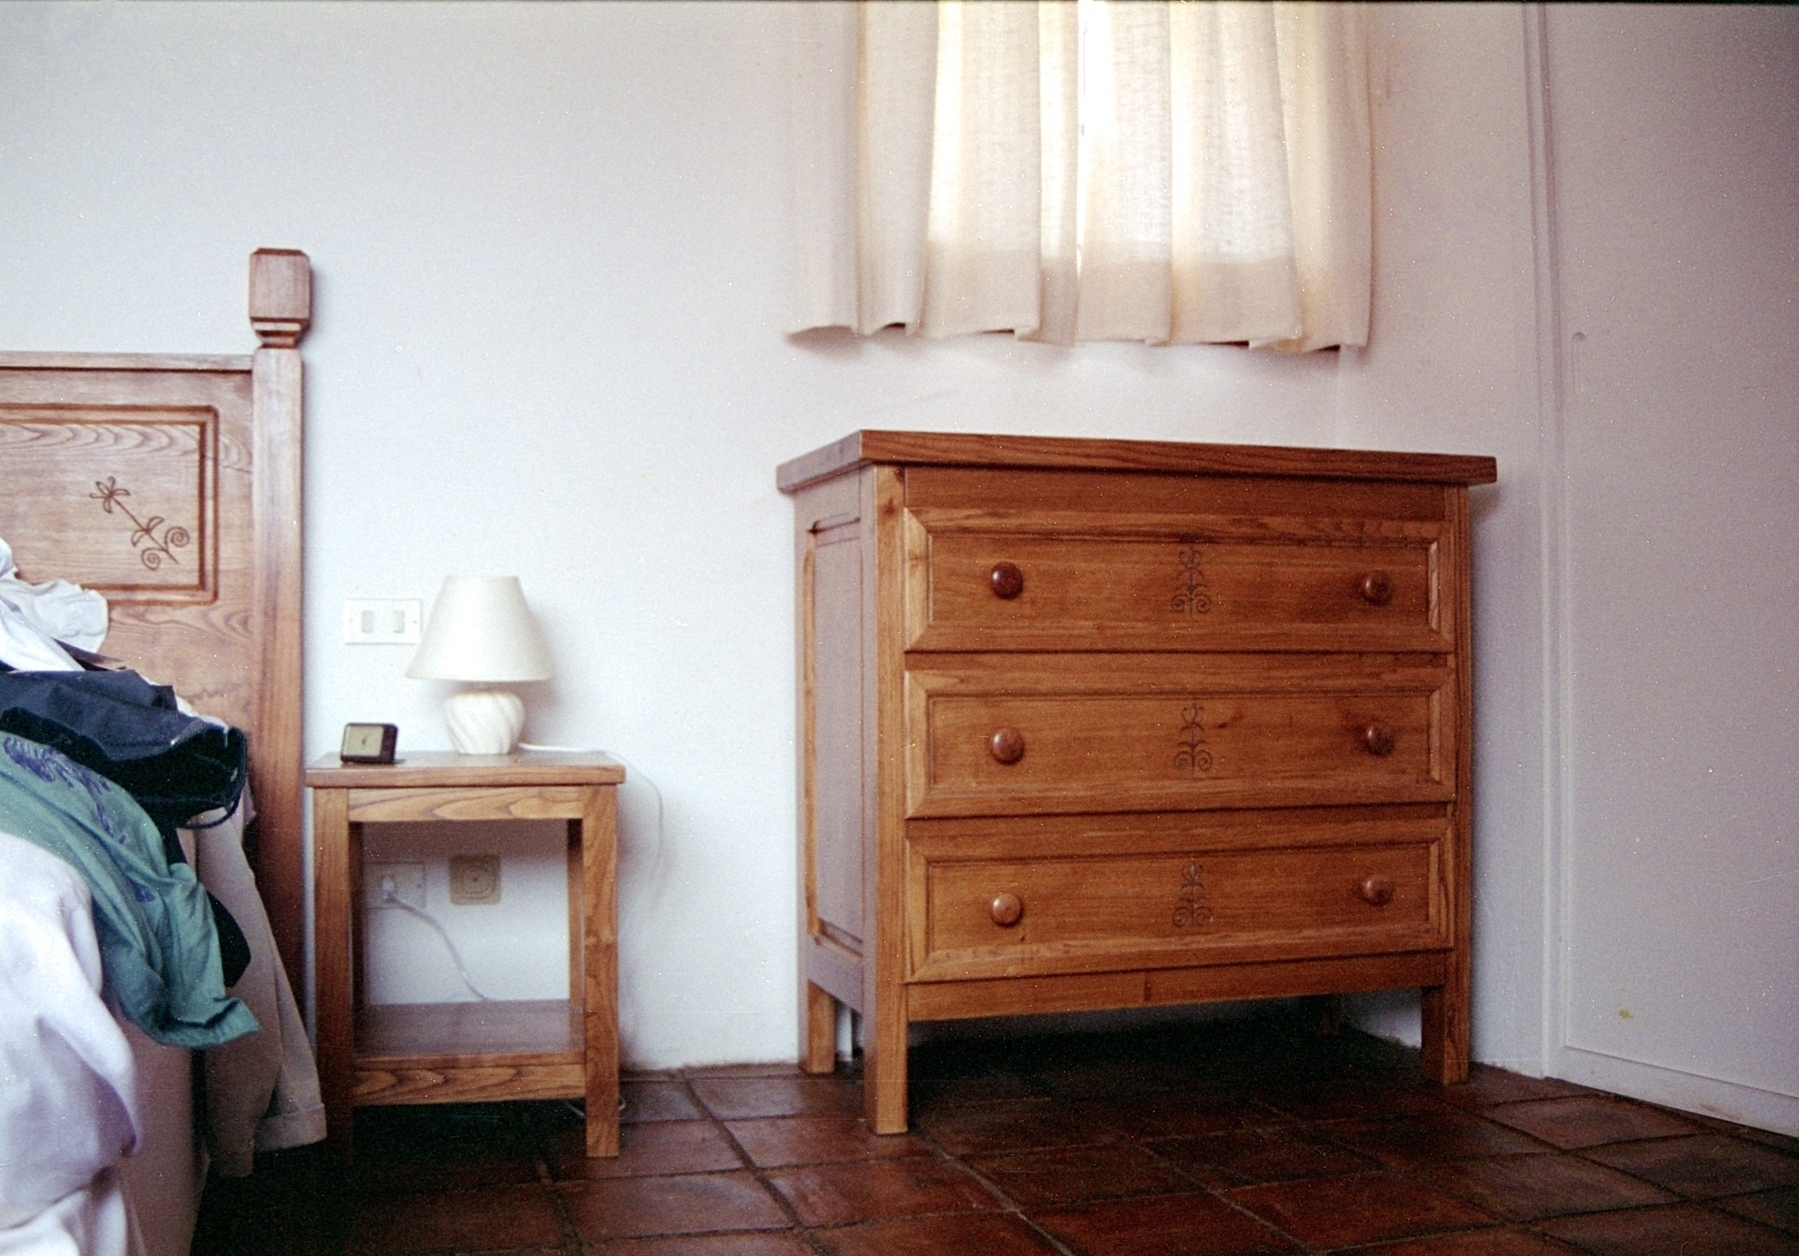 A chest of drawers in a Sardinian bedroom